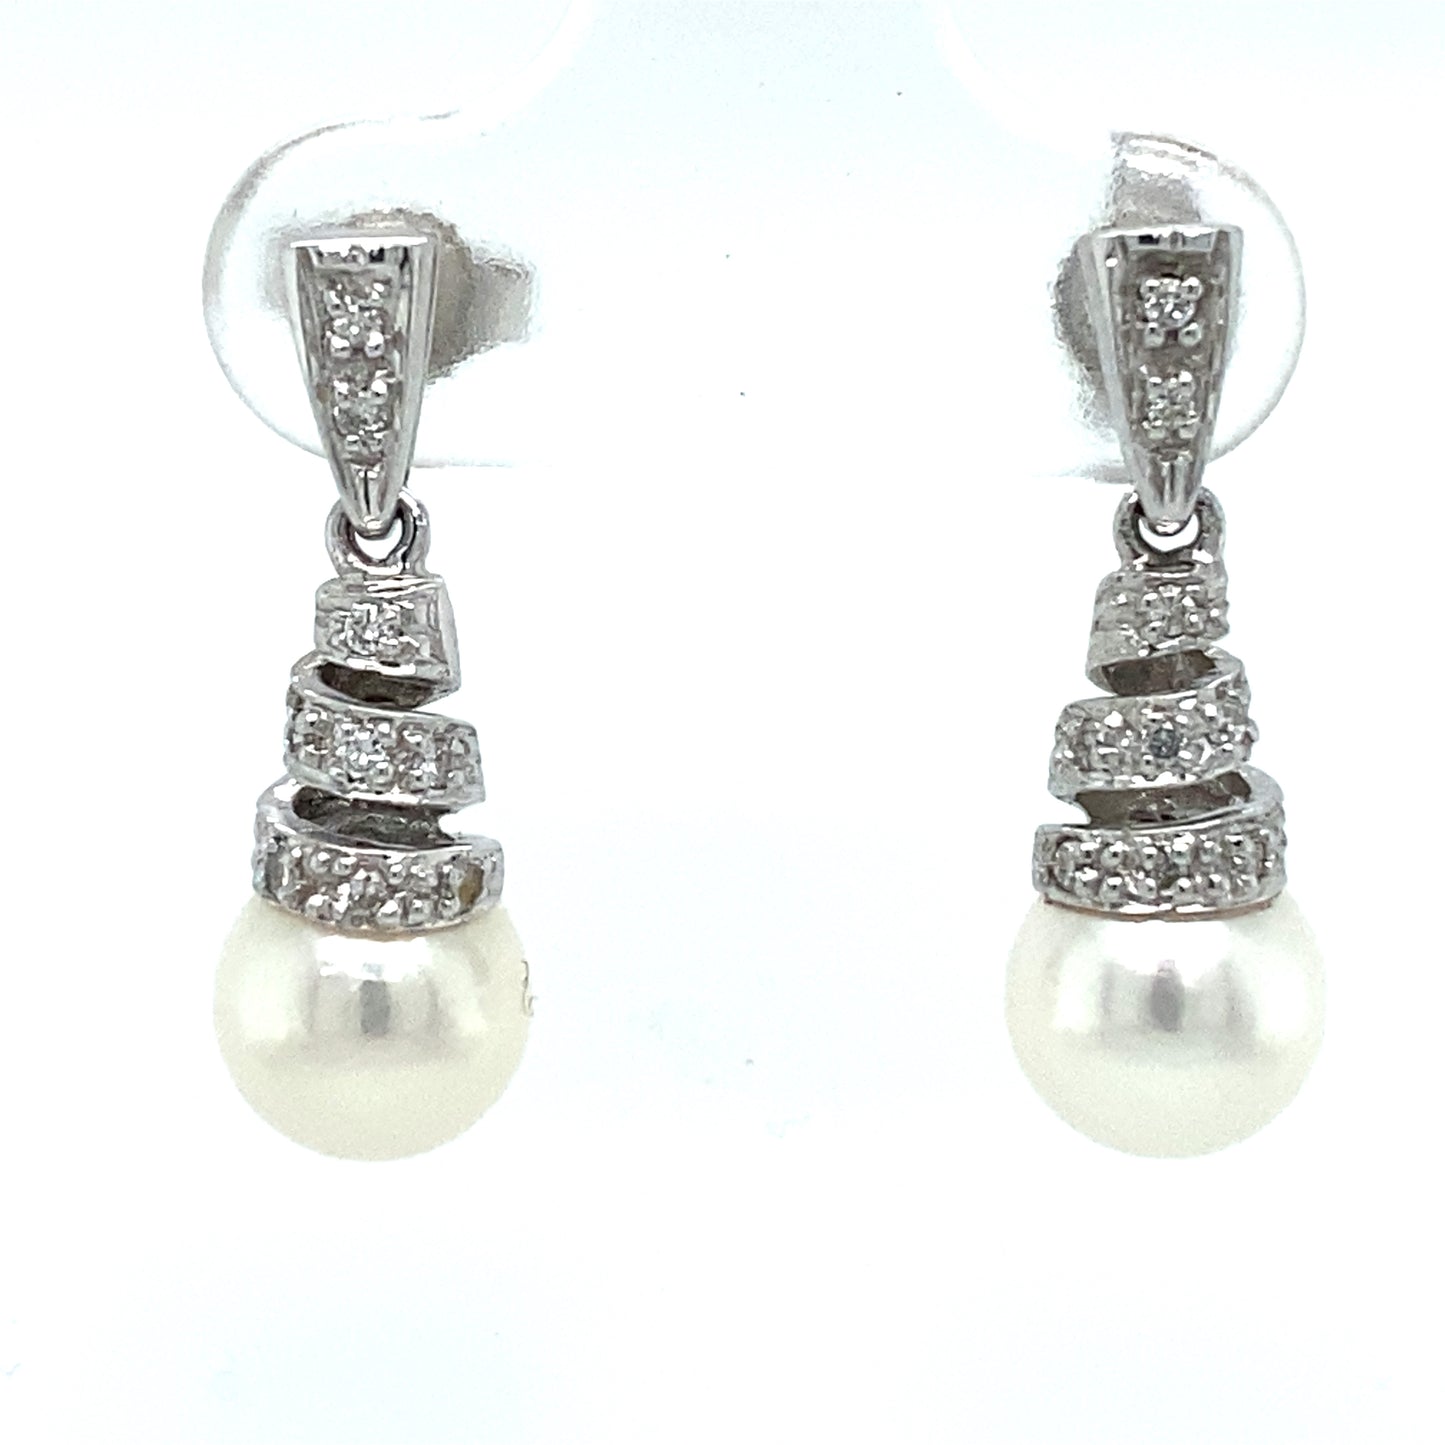 Circa 1990s Diamond and Pearl Spiral Drop Earrings in 14K White Gold